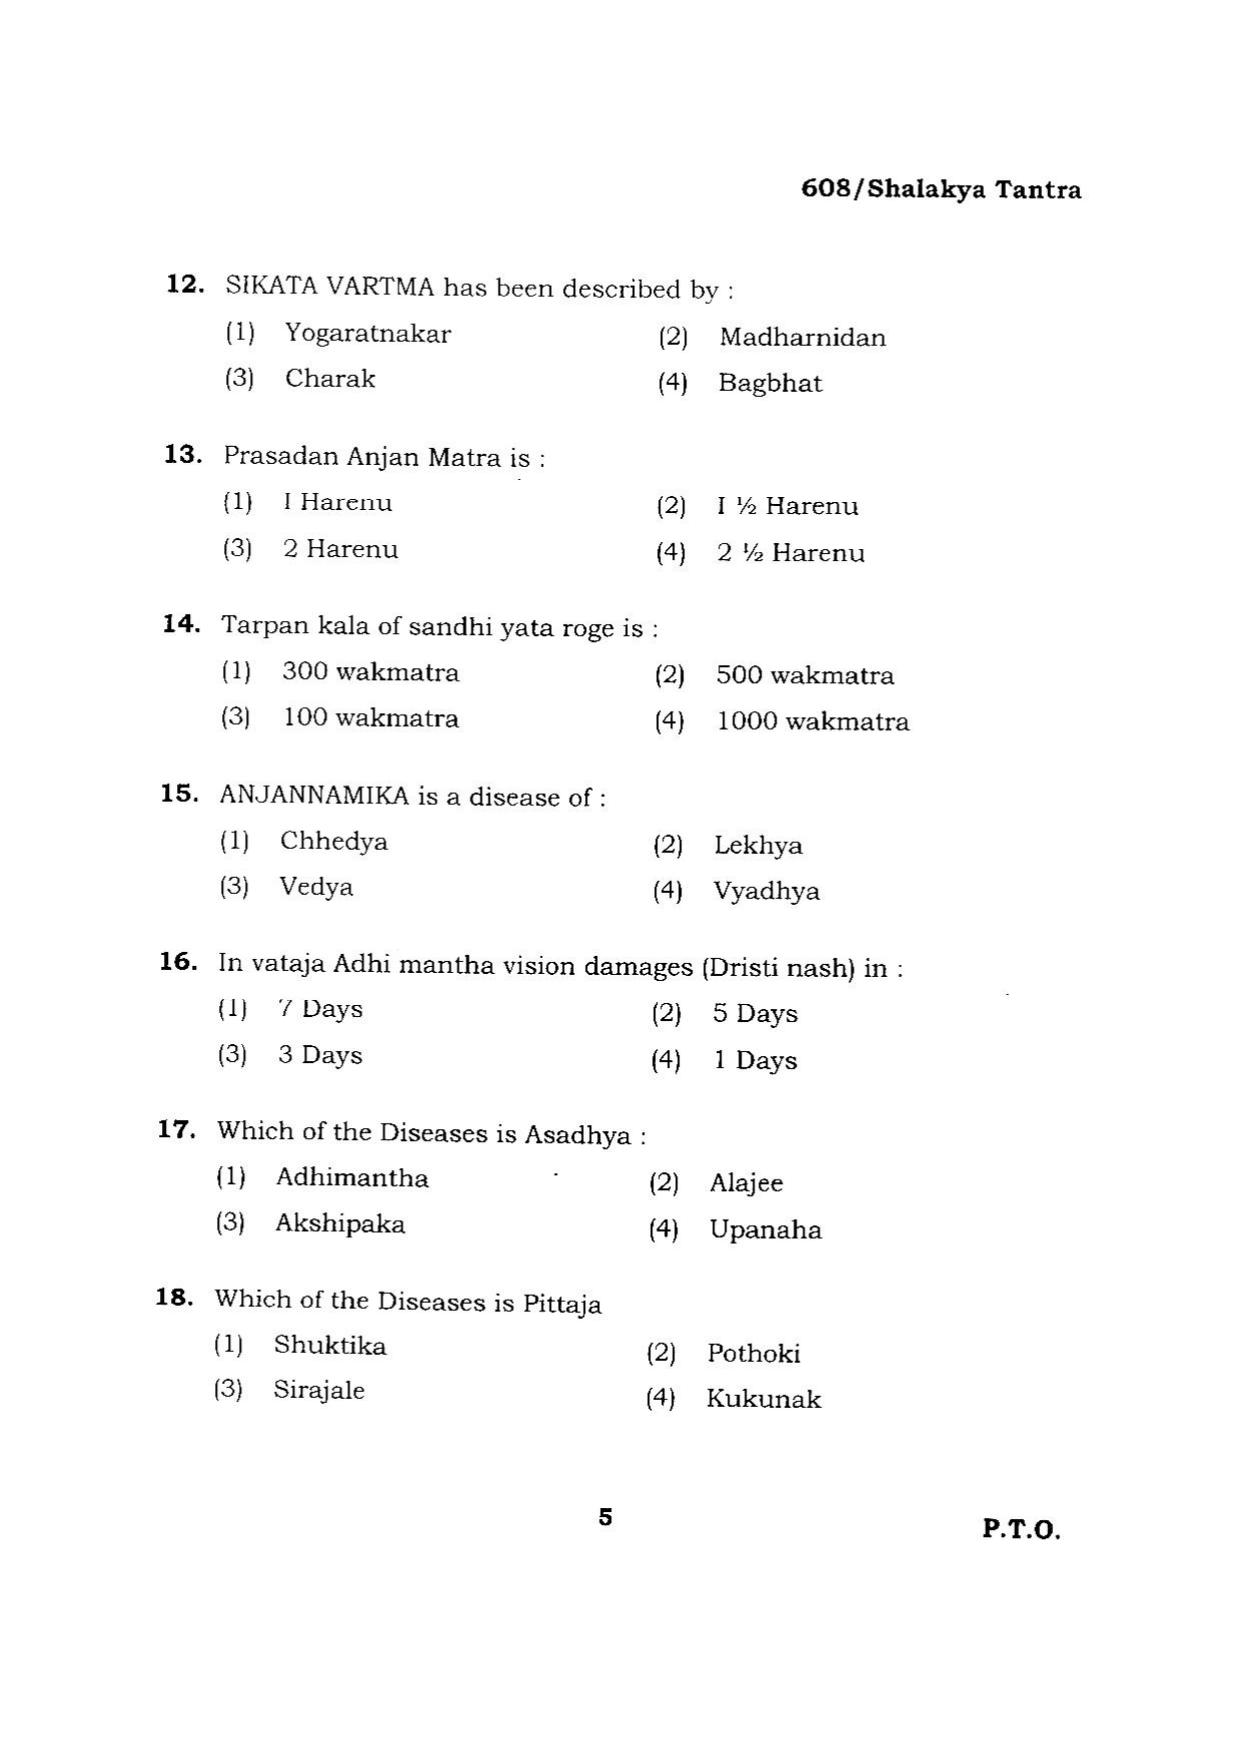 BHU RET SHALAKYA TANTRA 2015 Question Paper - Page 5